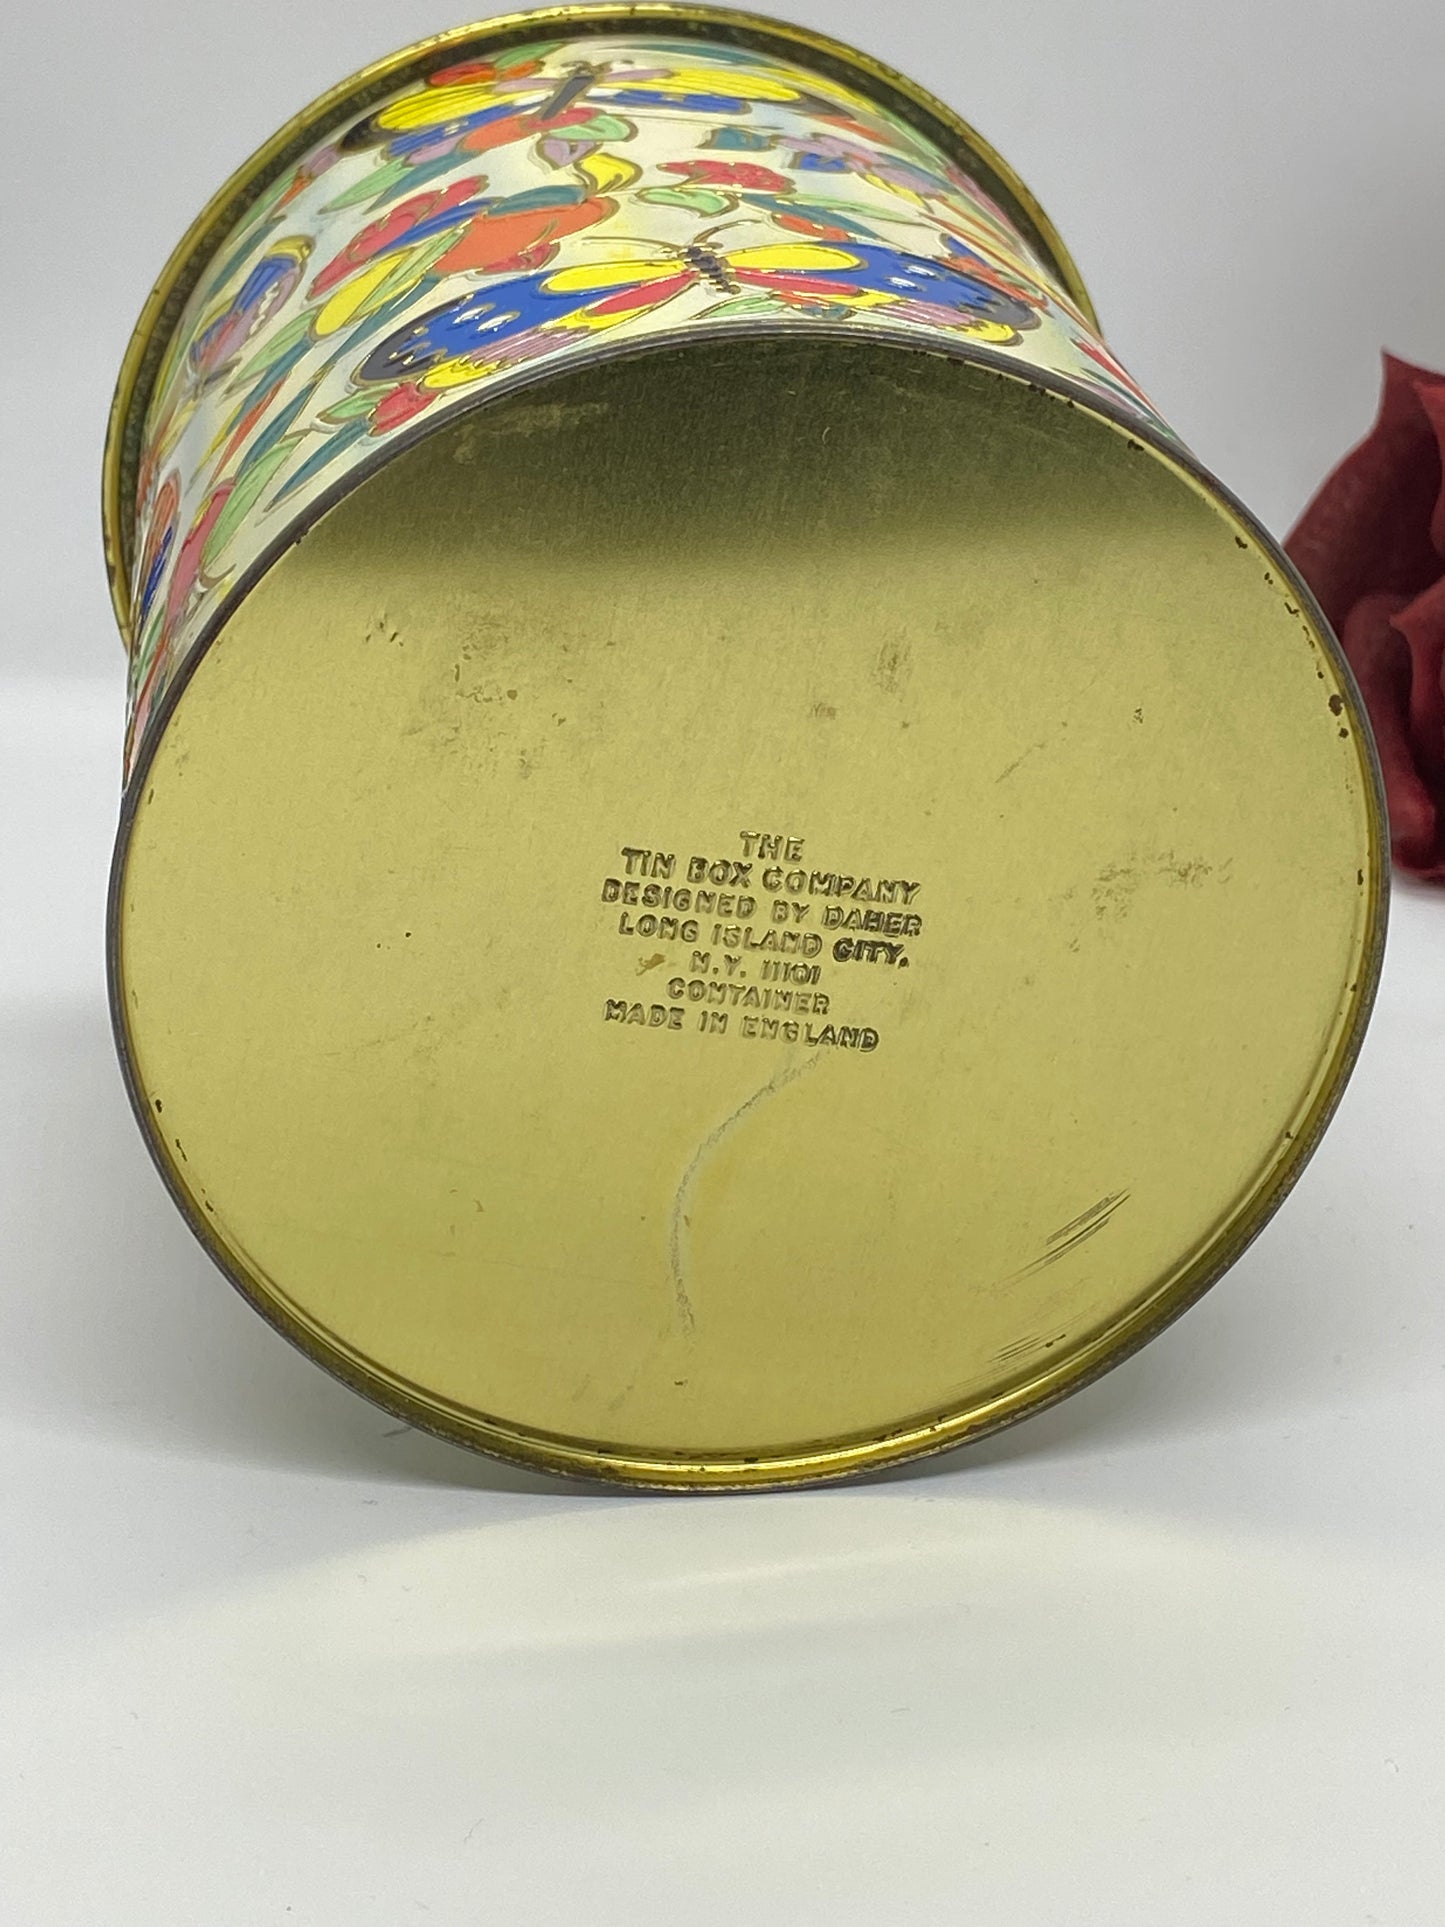 Butterfly Tin, Designed by Daher, Long Island, N. Y. Made in England